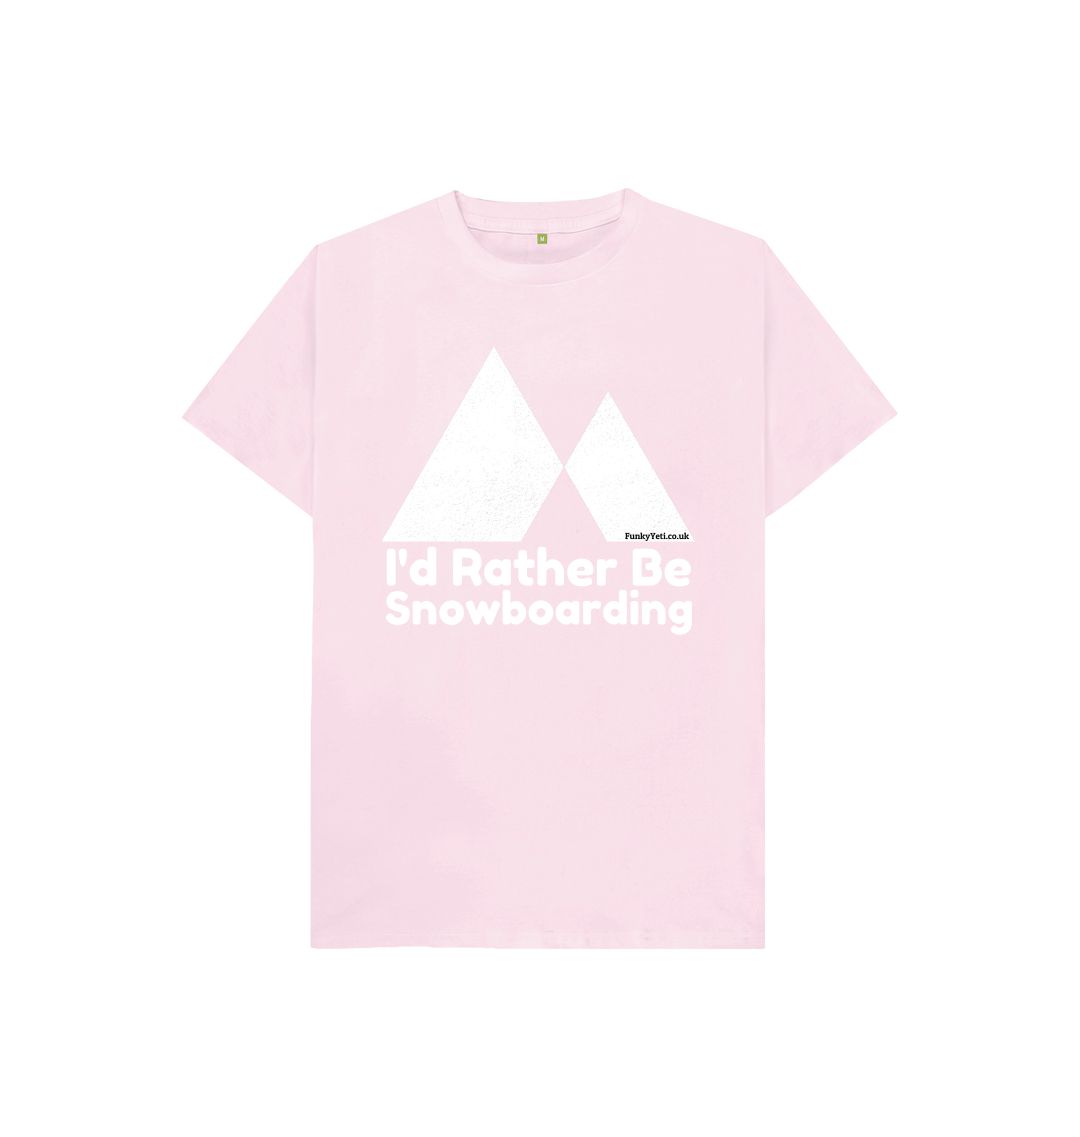 Pink Funky Yeti Kids Tee - I'd Rather Be Snowboarding